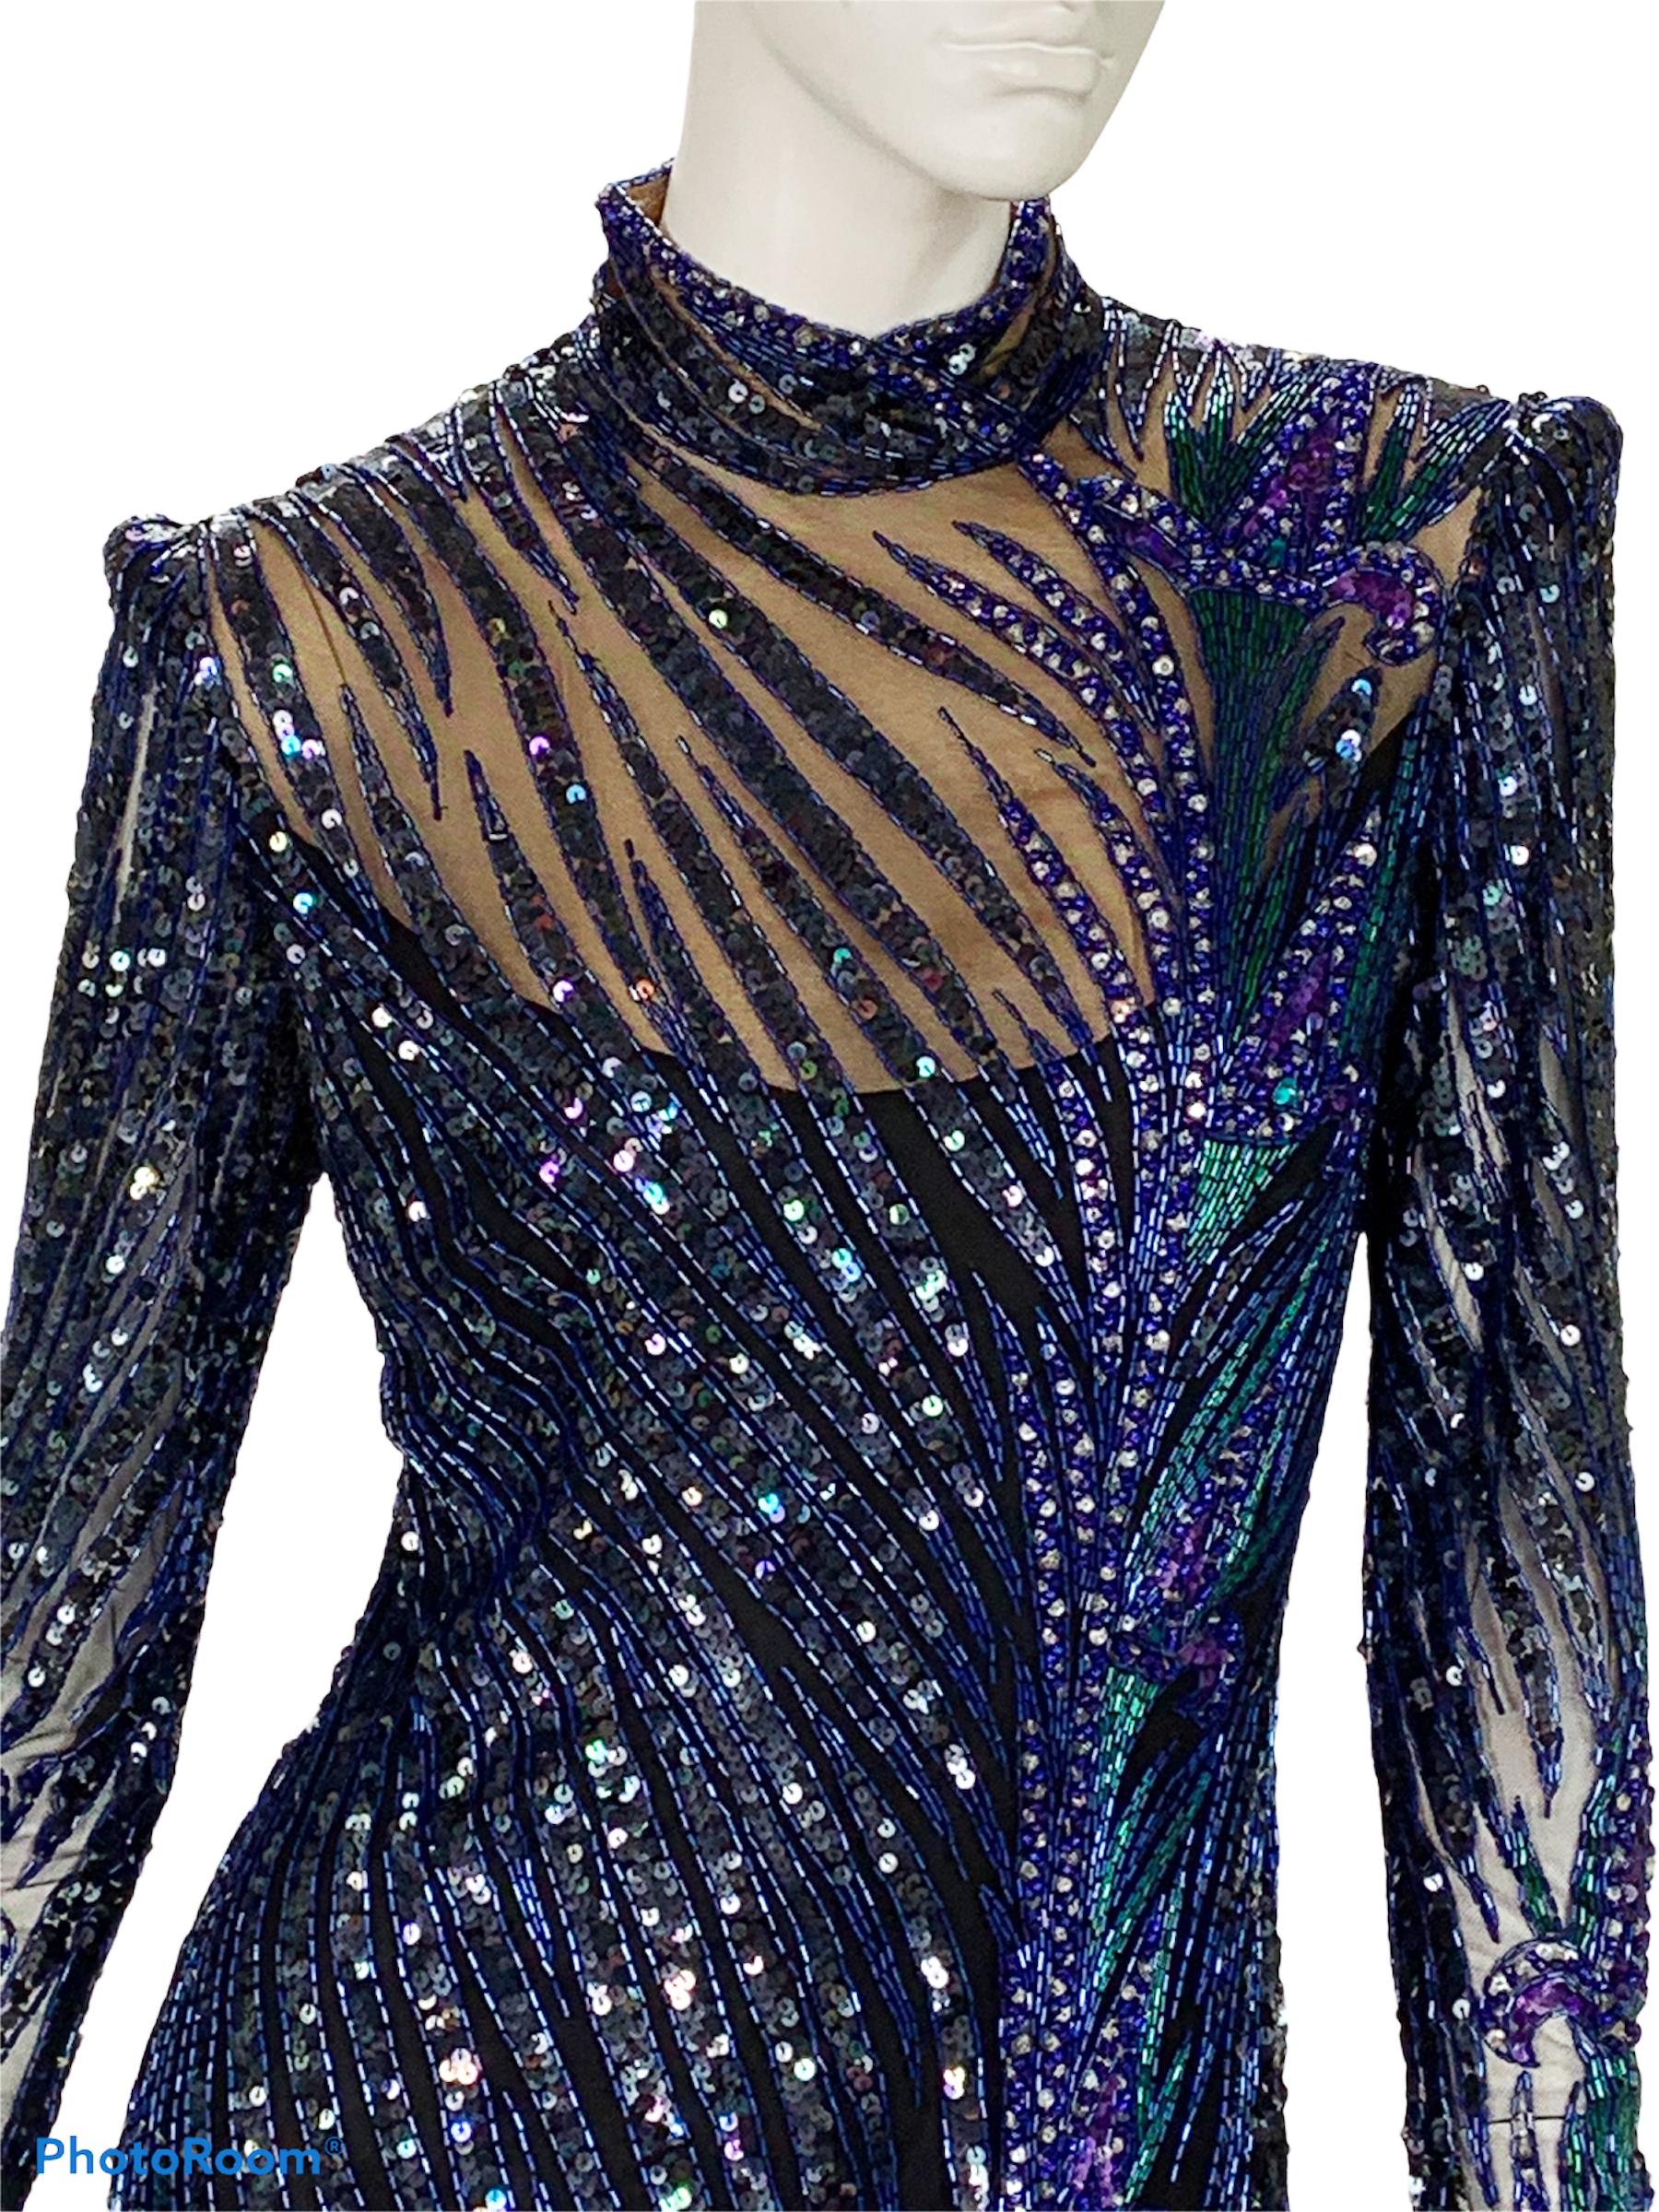 bob mackie clothes for sale